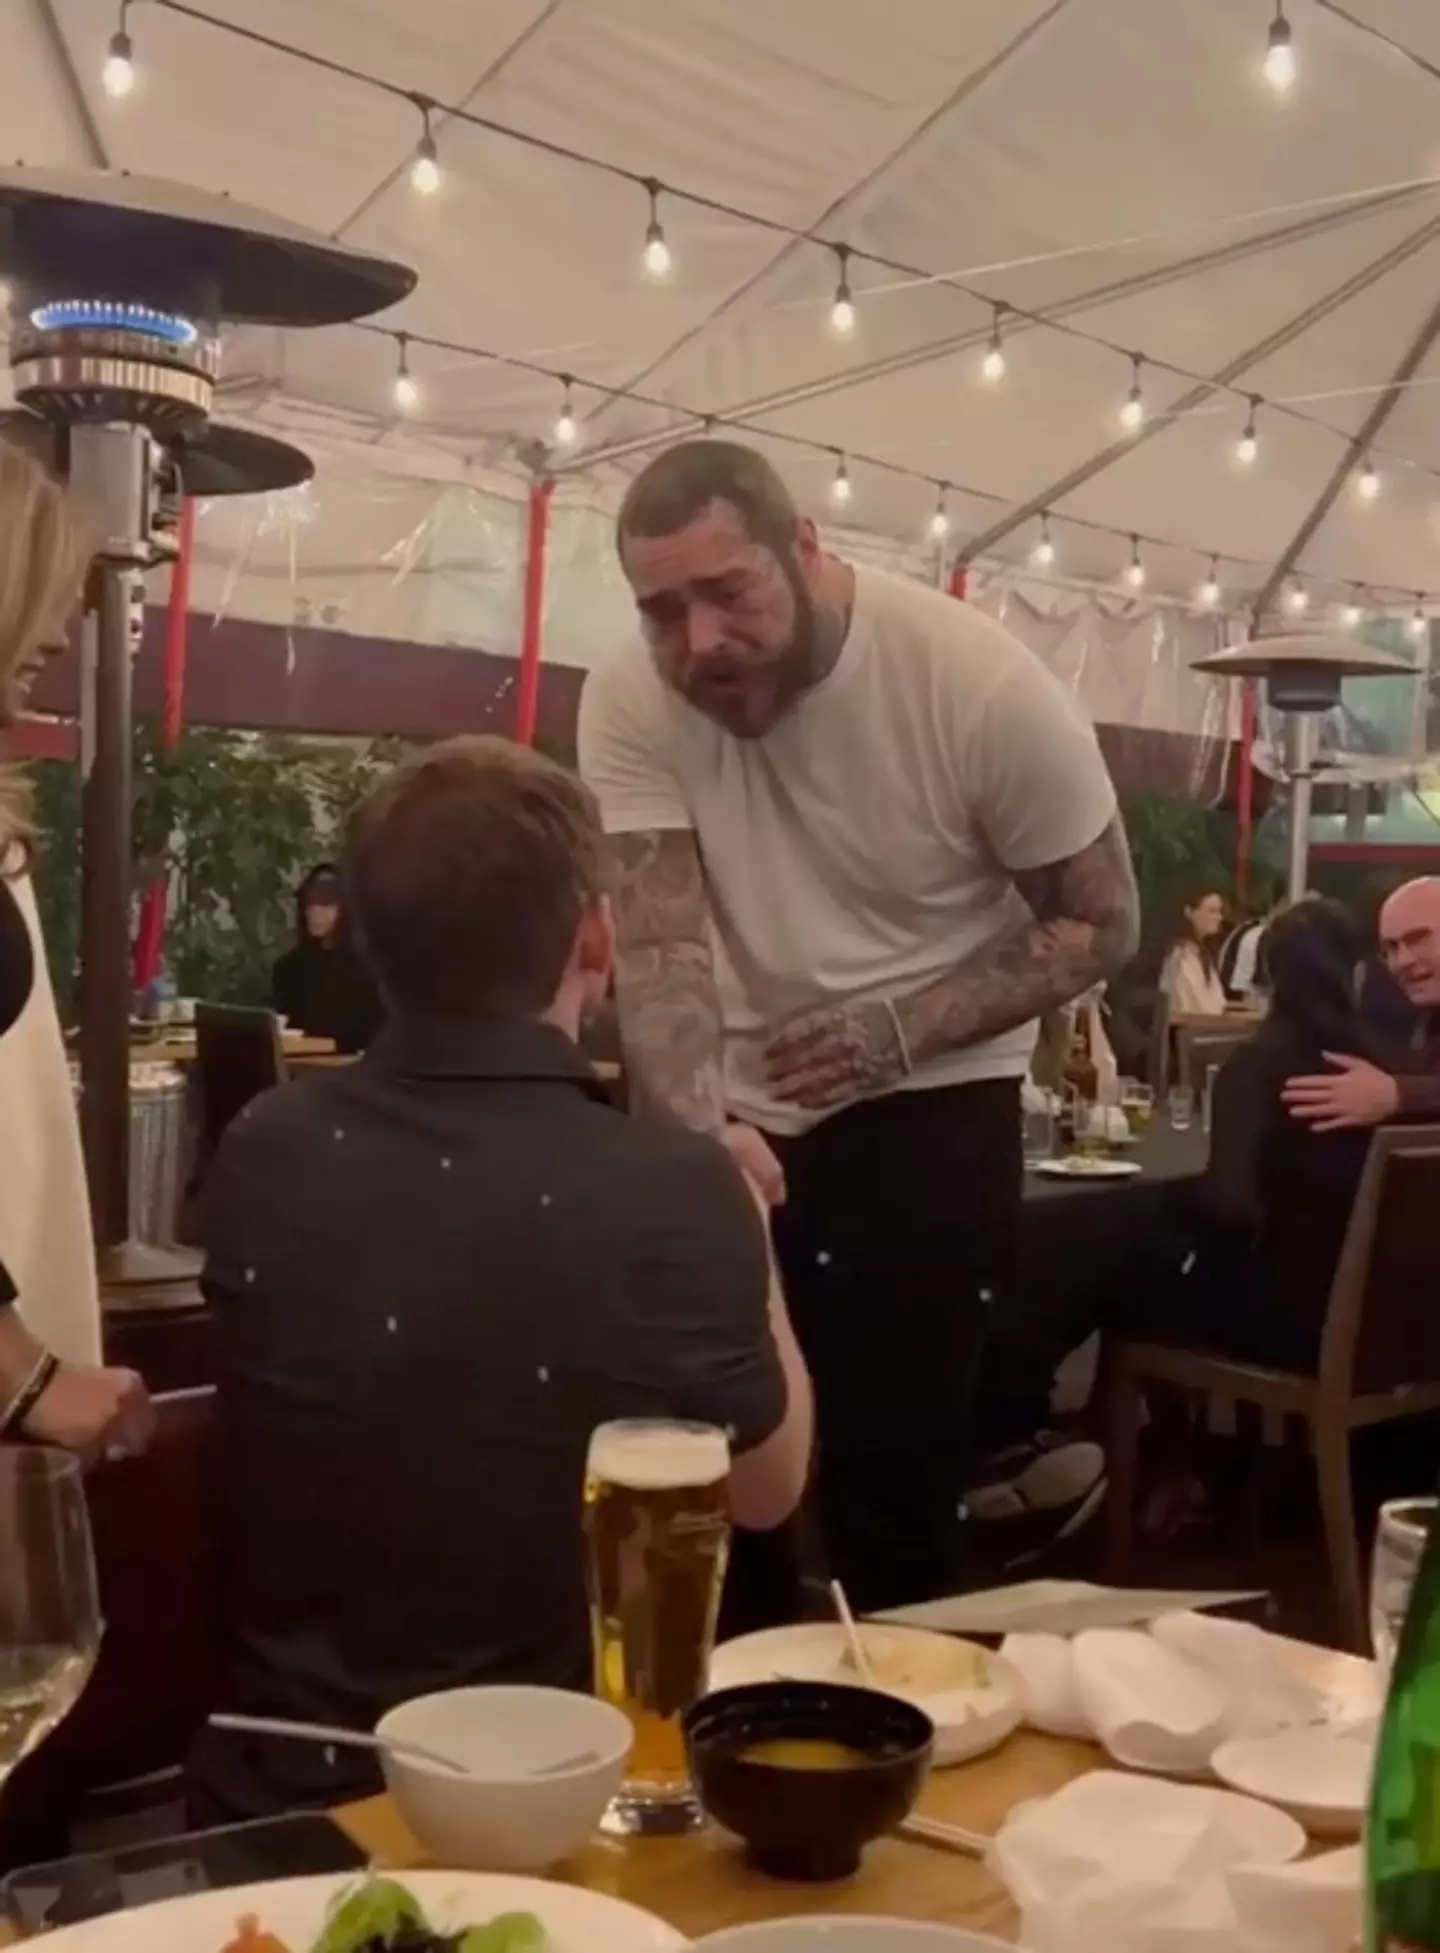 Post Malone met a fan at a restaurant.